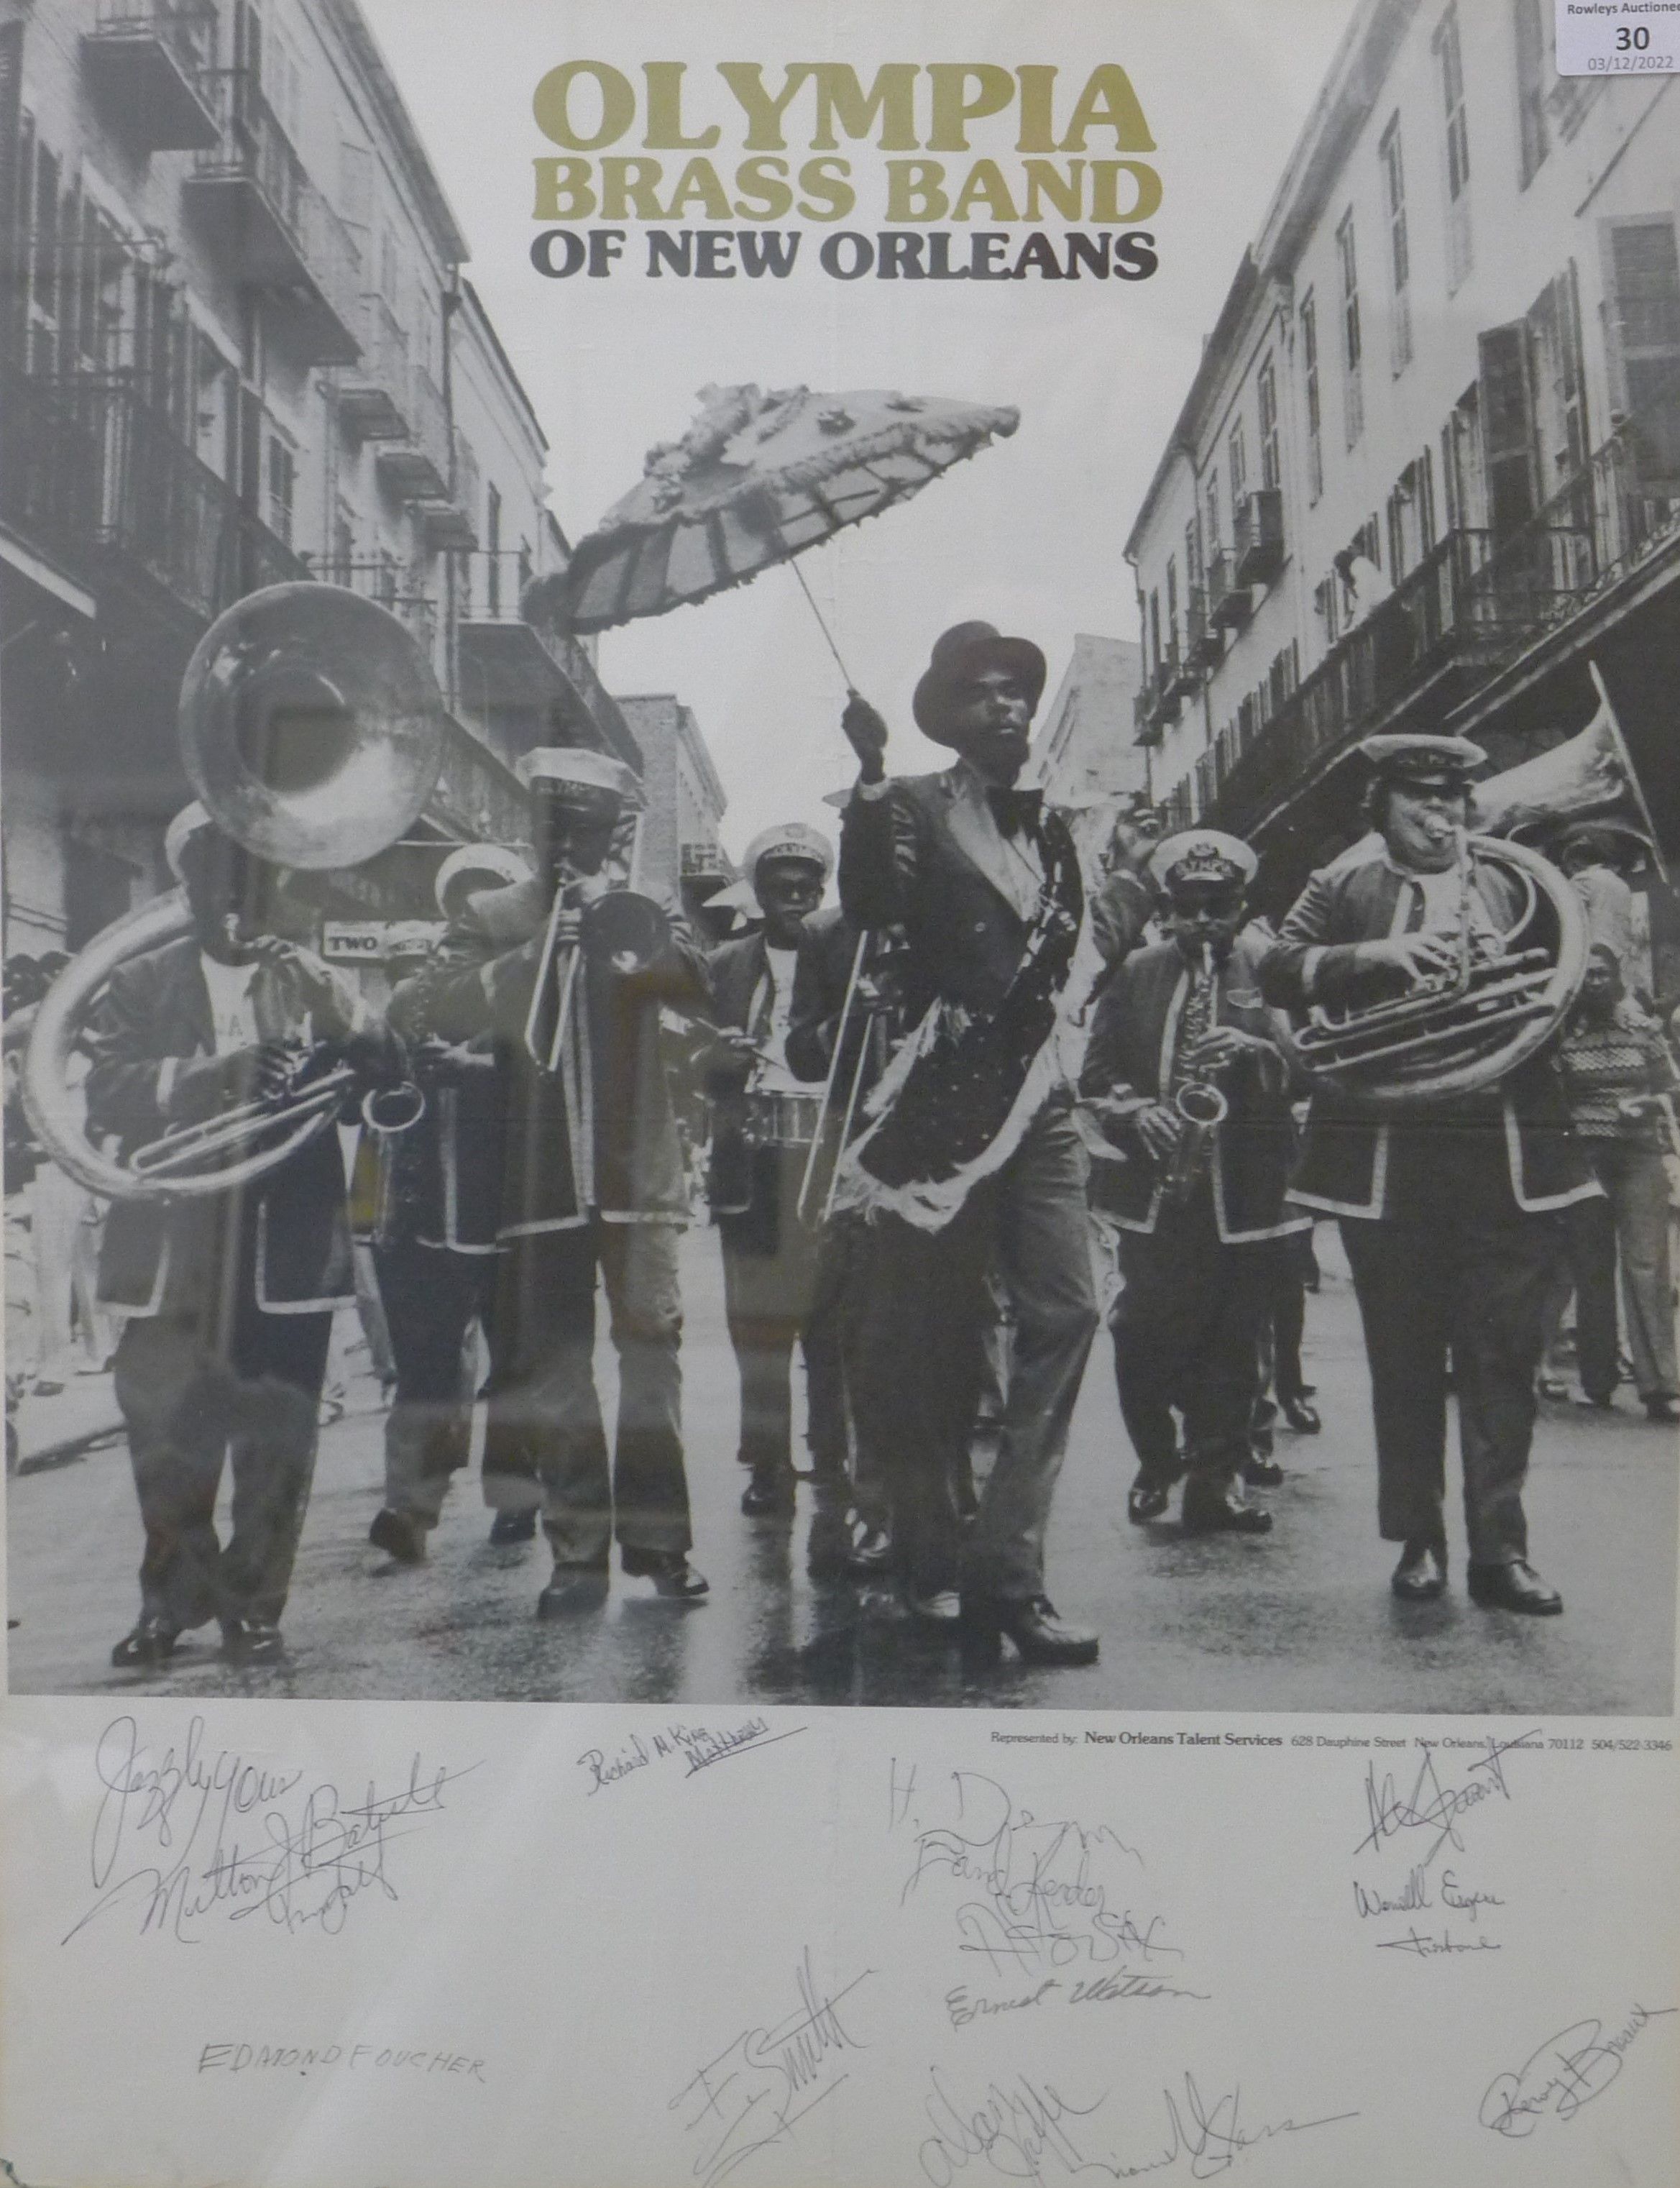 A signed Olympia brass band of New Orleans poster, glazed. 43 x 55.5 cm. - Image 2 of 2